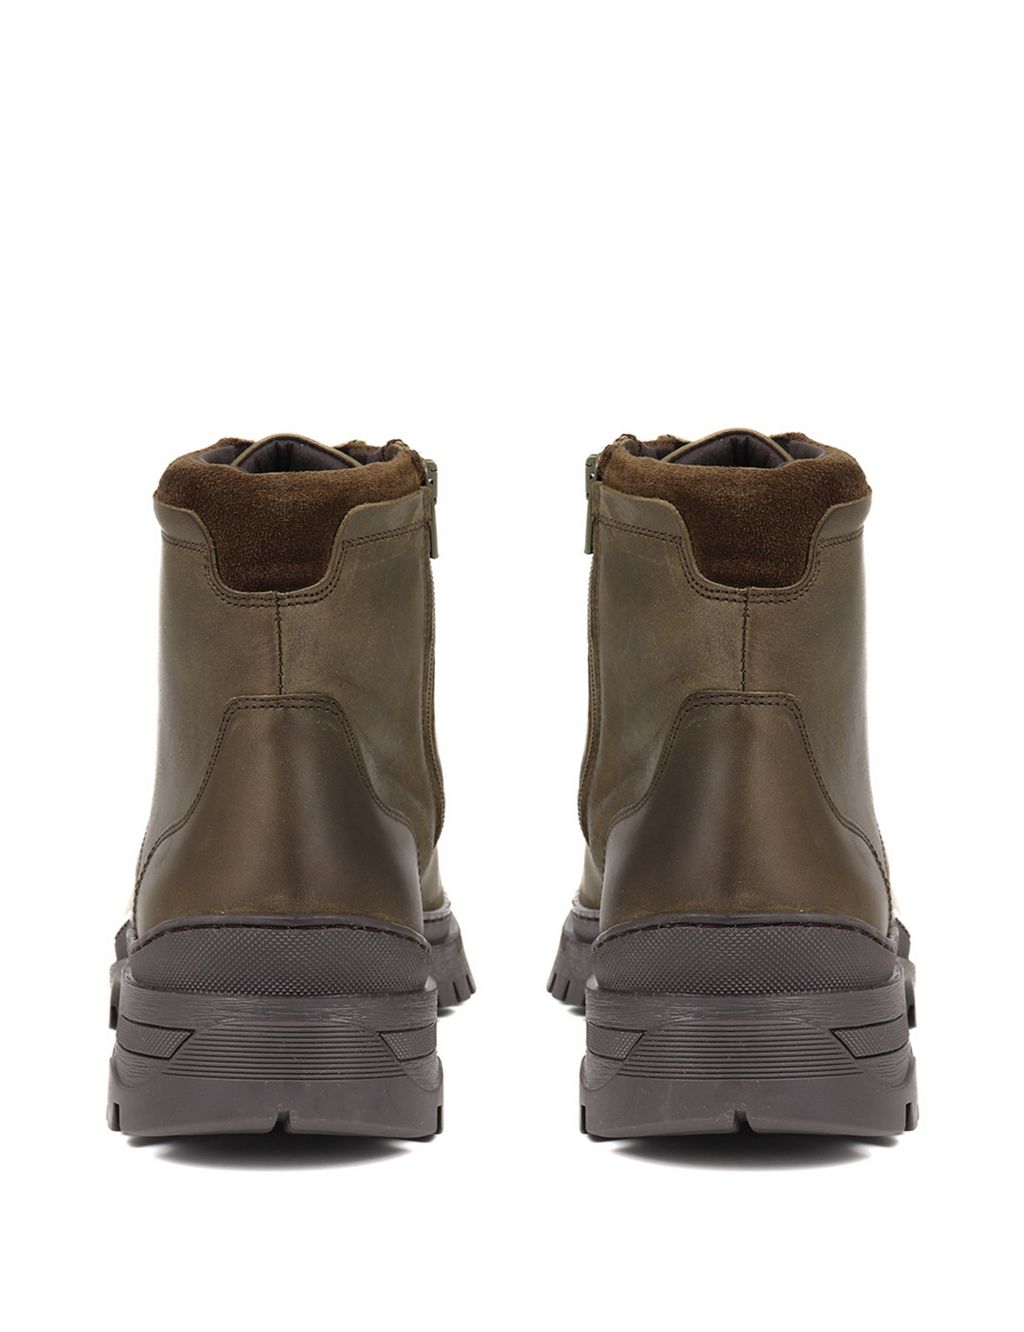 Leather Side Zip Casual Boots image 5